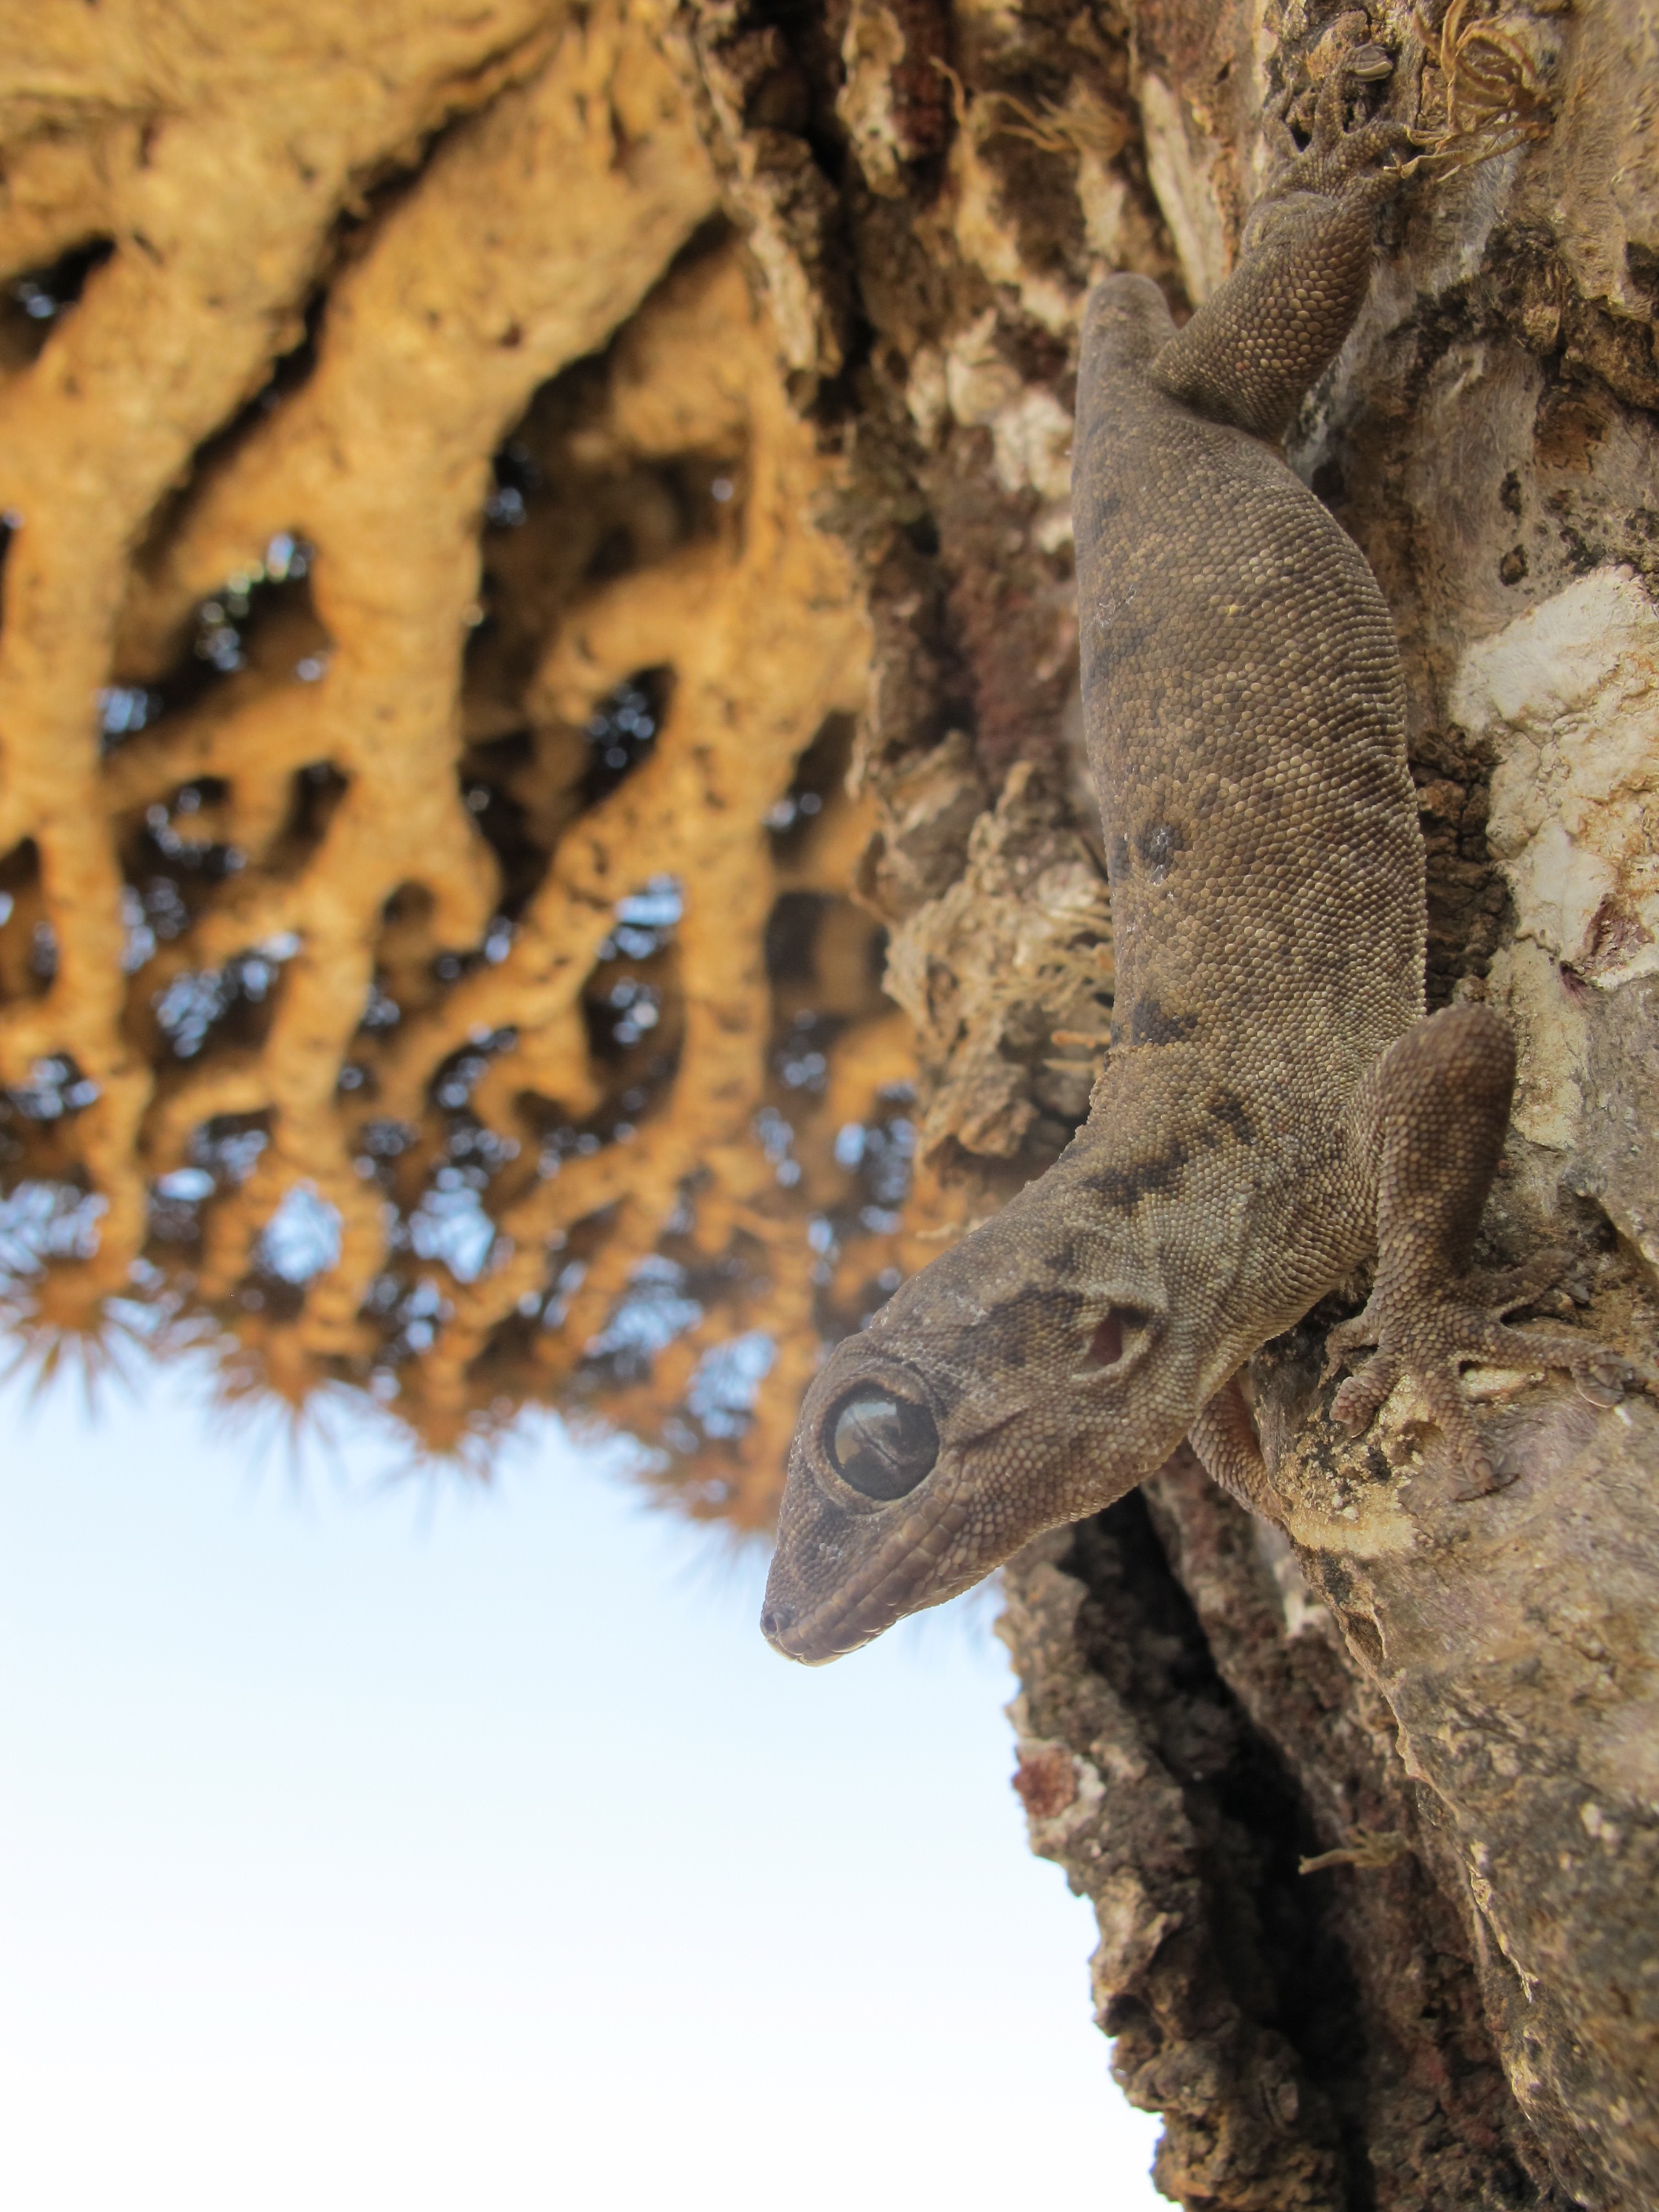 Haemodracon riebeckii, one of the gecko species.